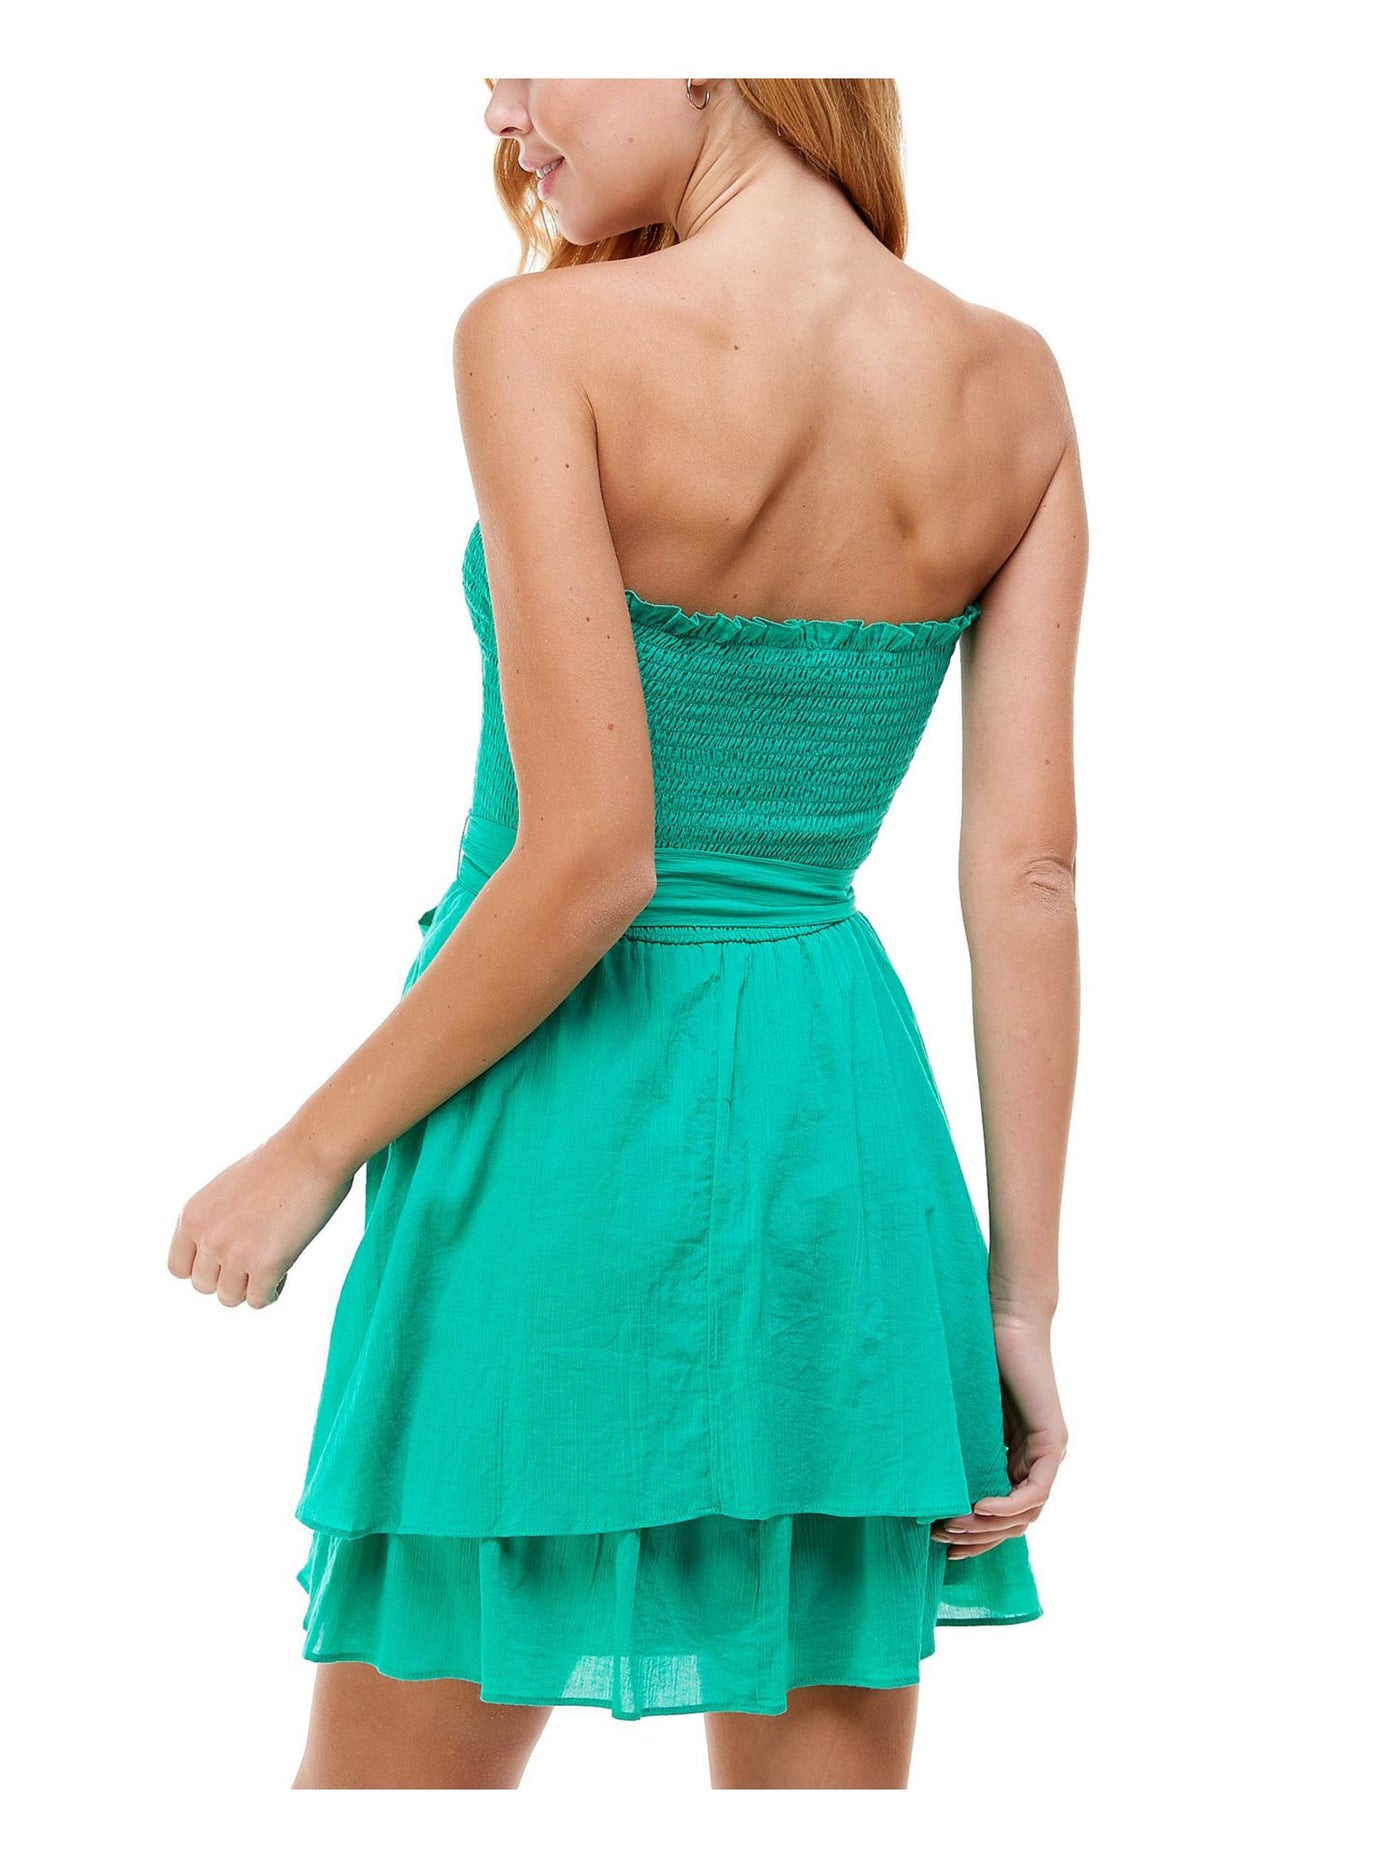 CITY STUDIO Womens Green Ruffled Tie Smocked Strapless Short Party Fit + Flare Dress Juniors L